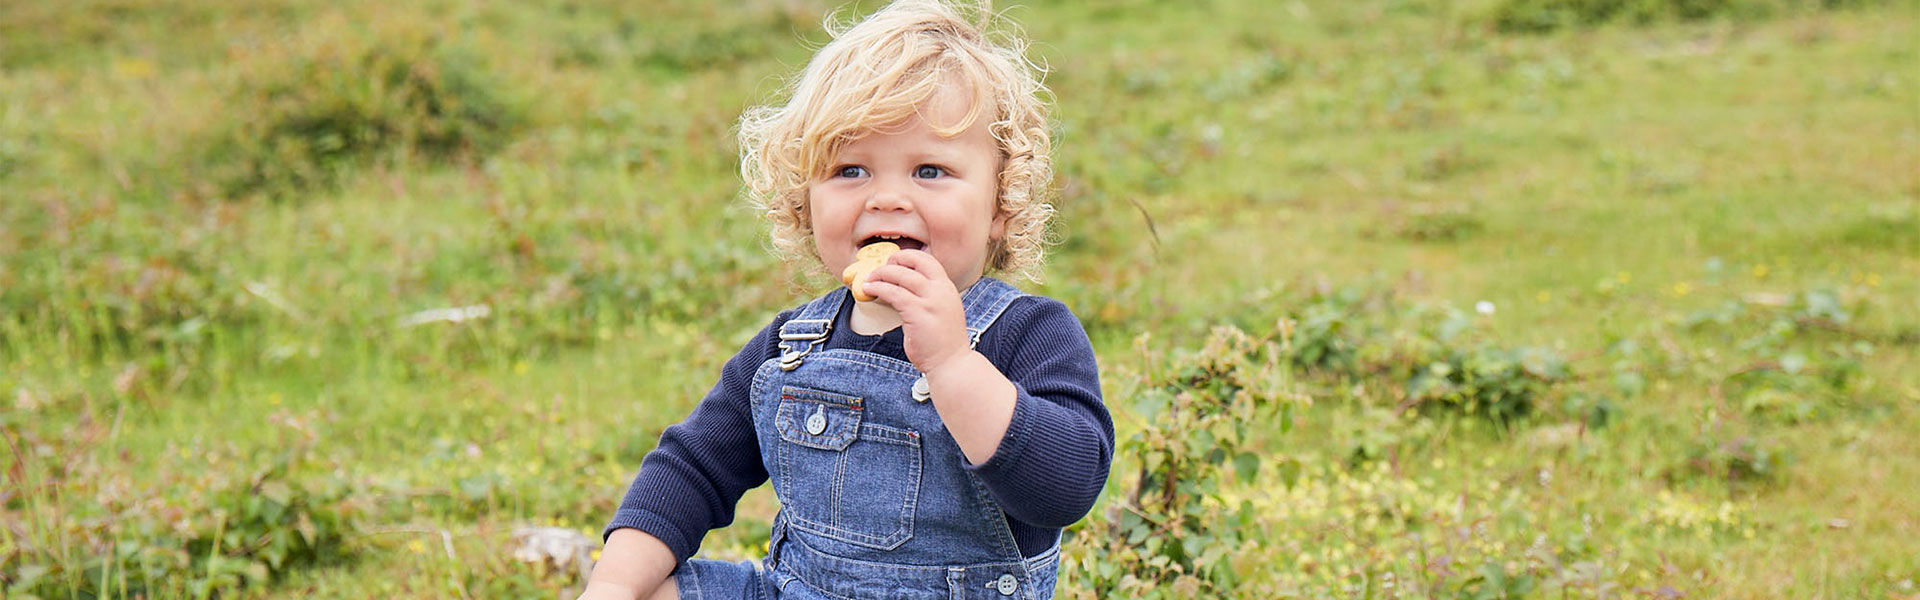 Toddler eating a biscuit in a field